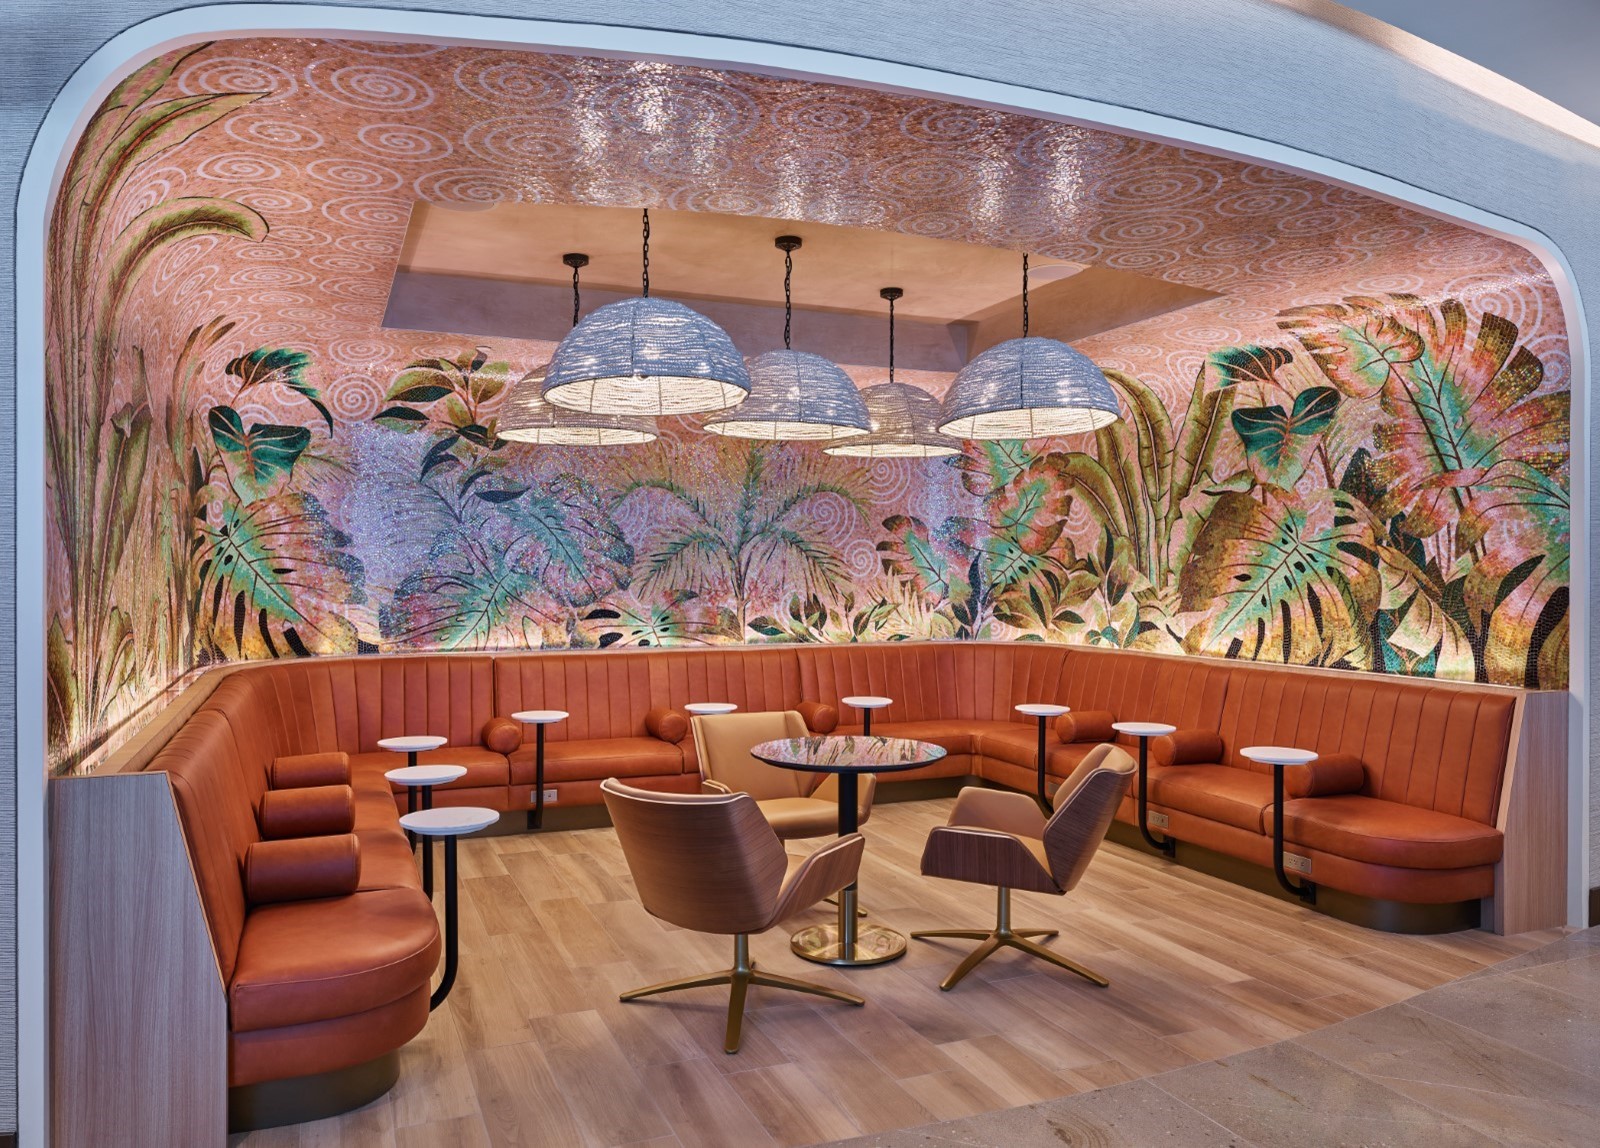 The LAX Sky Club's Coffee Grotto is a nook that offers a glamorous glimpse of Hollywood's Golden Age ambiance with an exquisite mosaic mural featuring glass tiles imported from Italy.